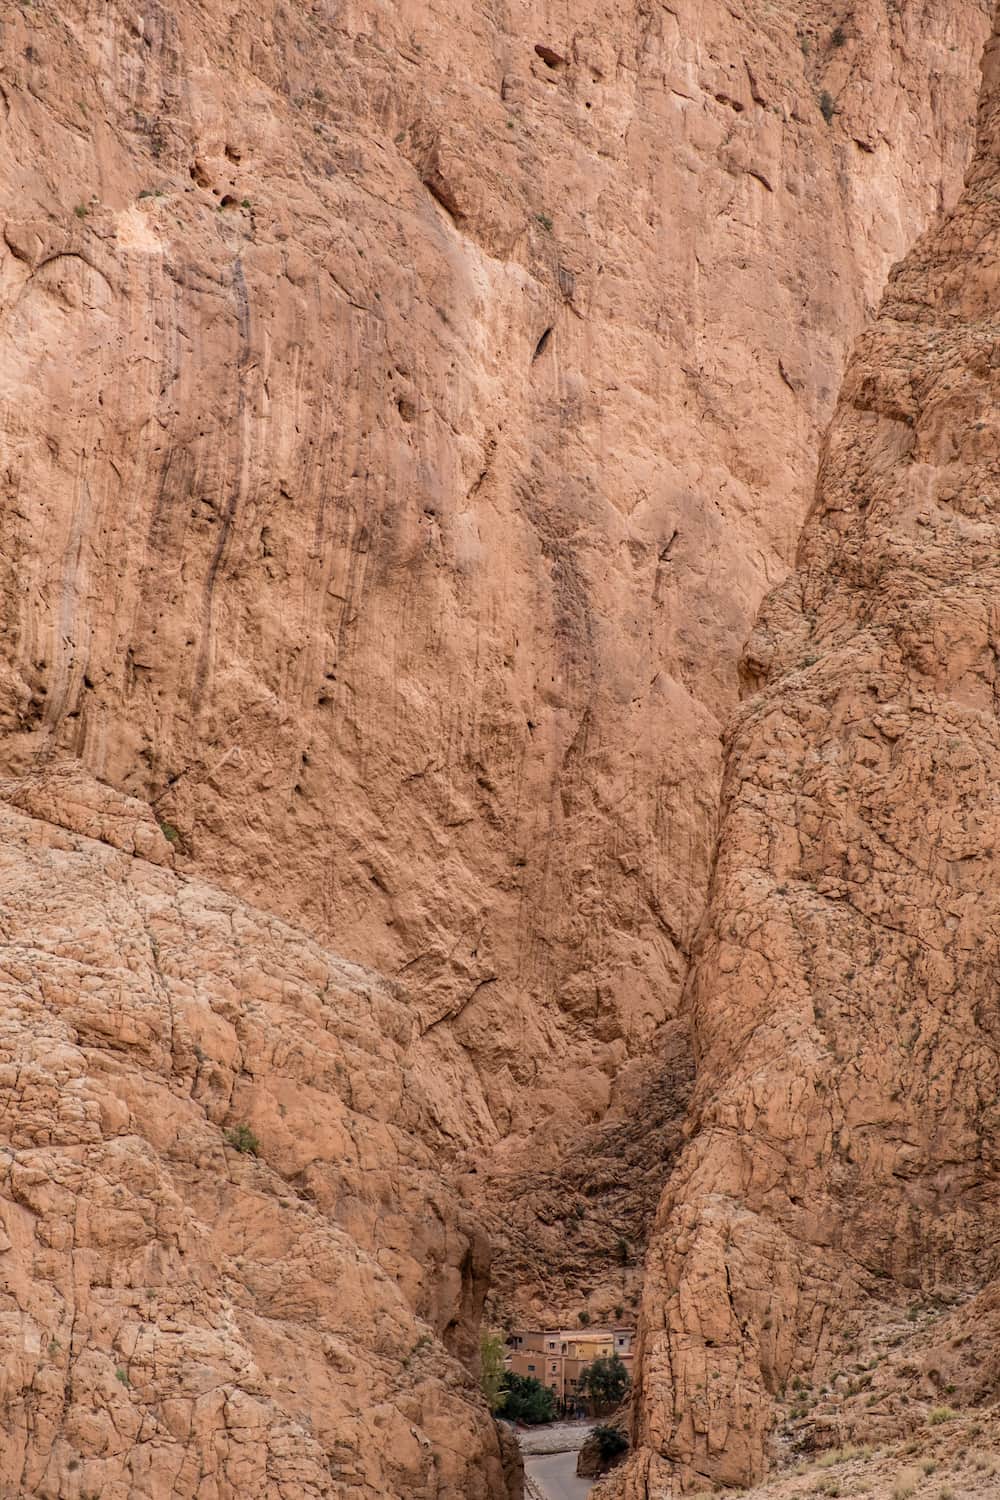 Steep and narrow exit to Todra Gorge